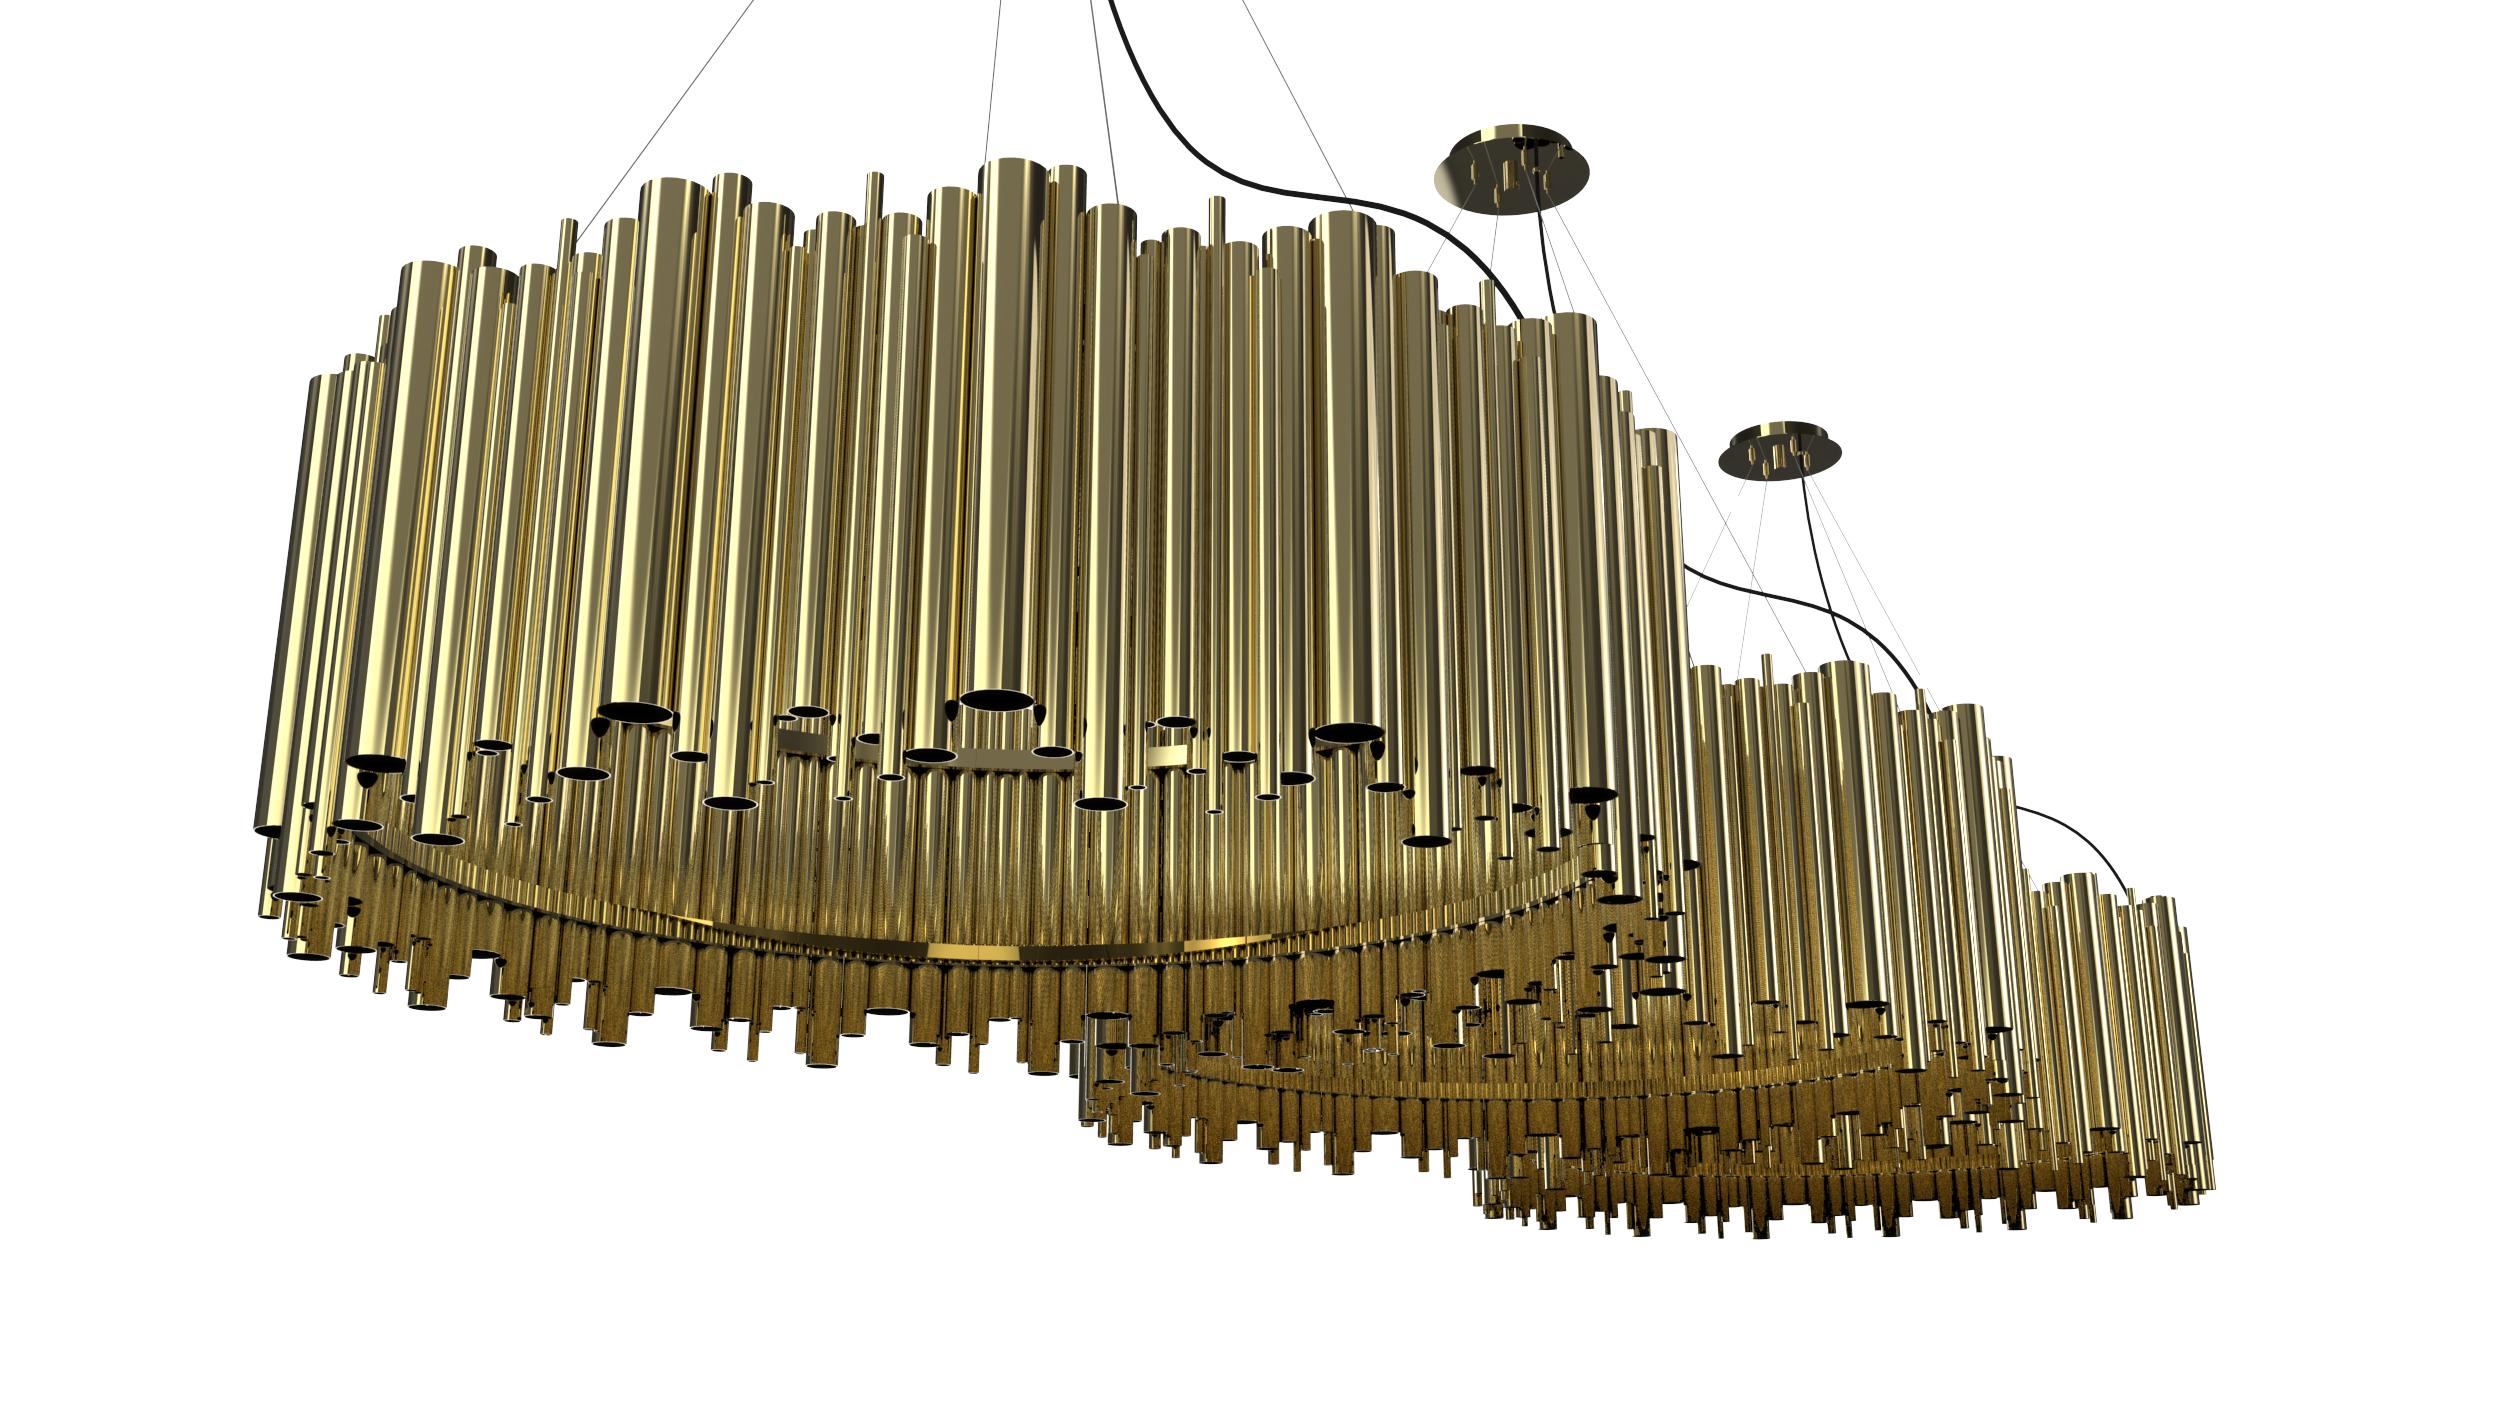 Brubeck Mid-Century Modern chandelier is inspired by one of the foremost exponents of cool jazz: Dave Brubeck. This unique lighting design represents the sophistication and finesse of the American jazz pianist, displaying a very luxurious feeling.